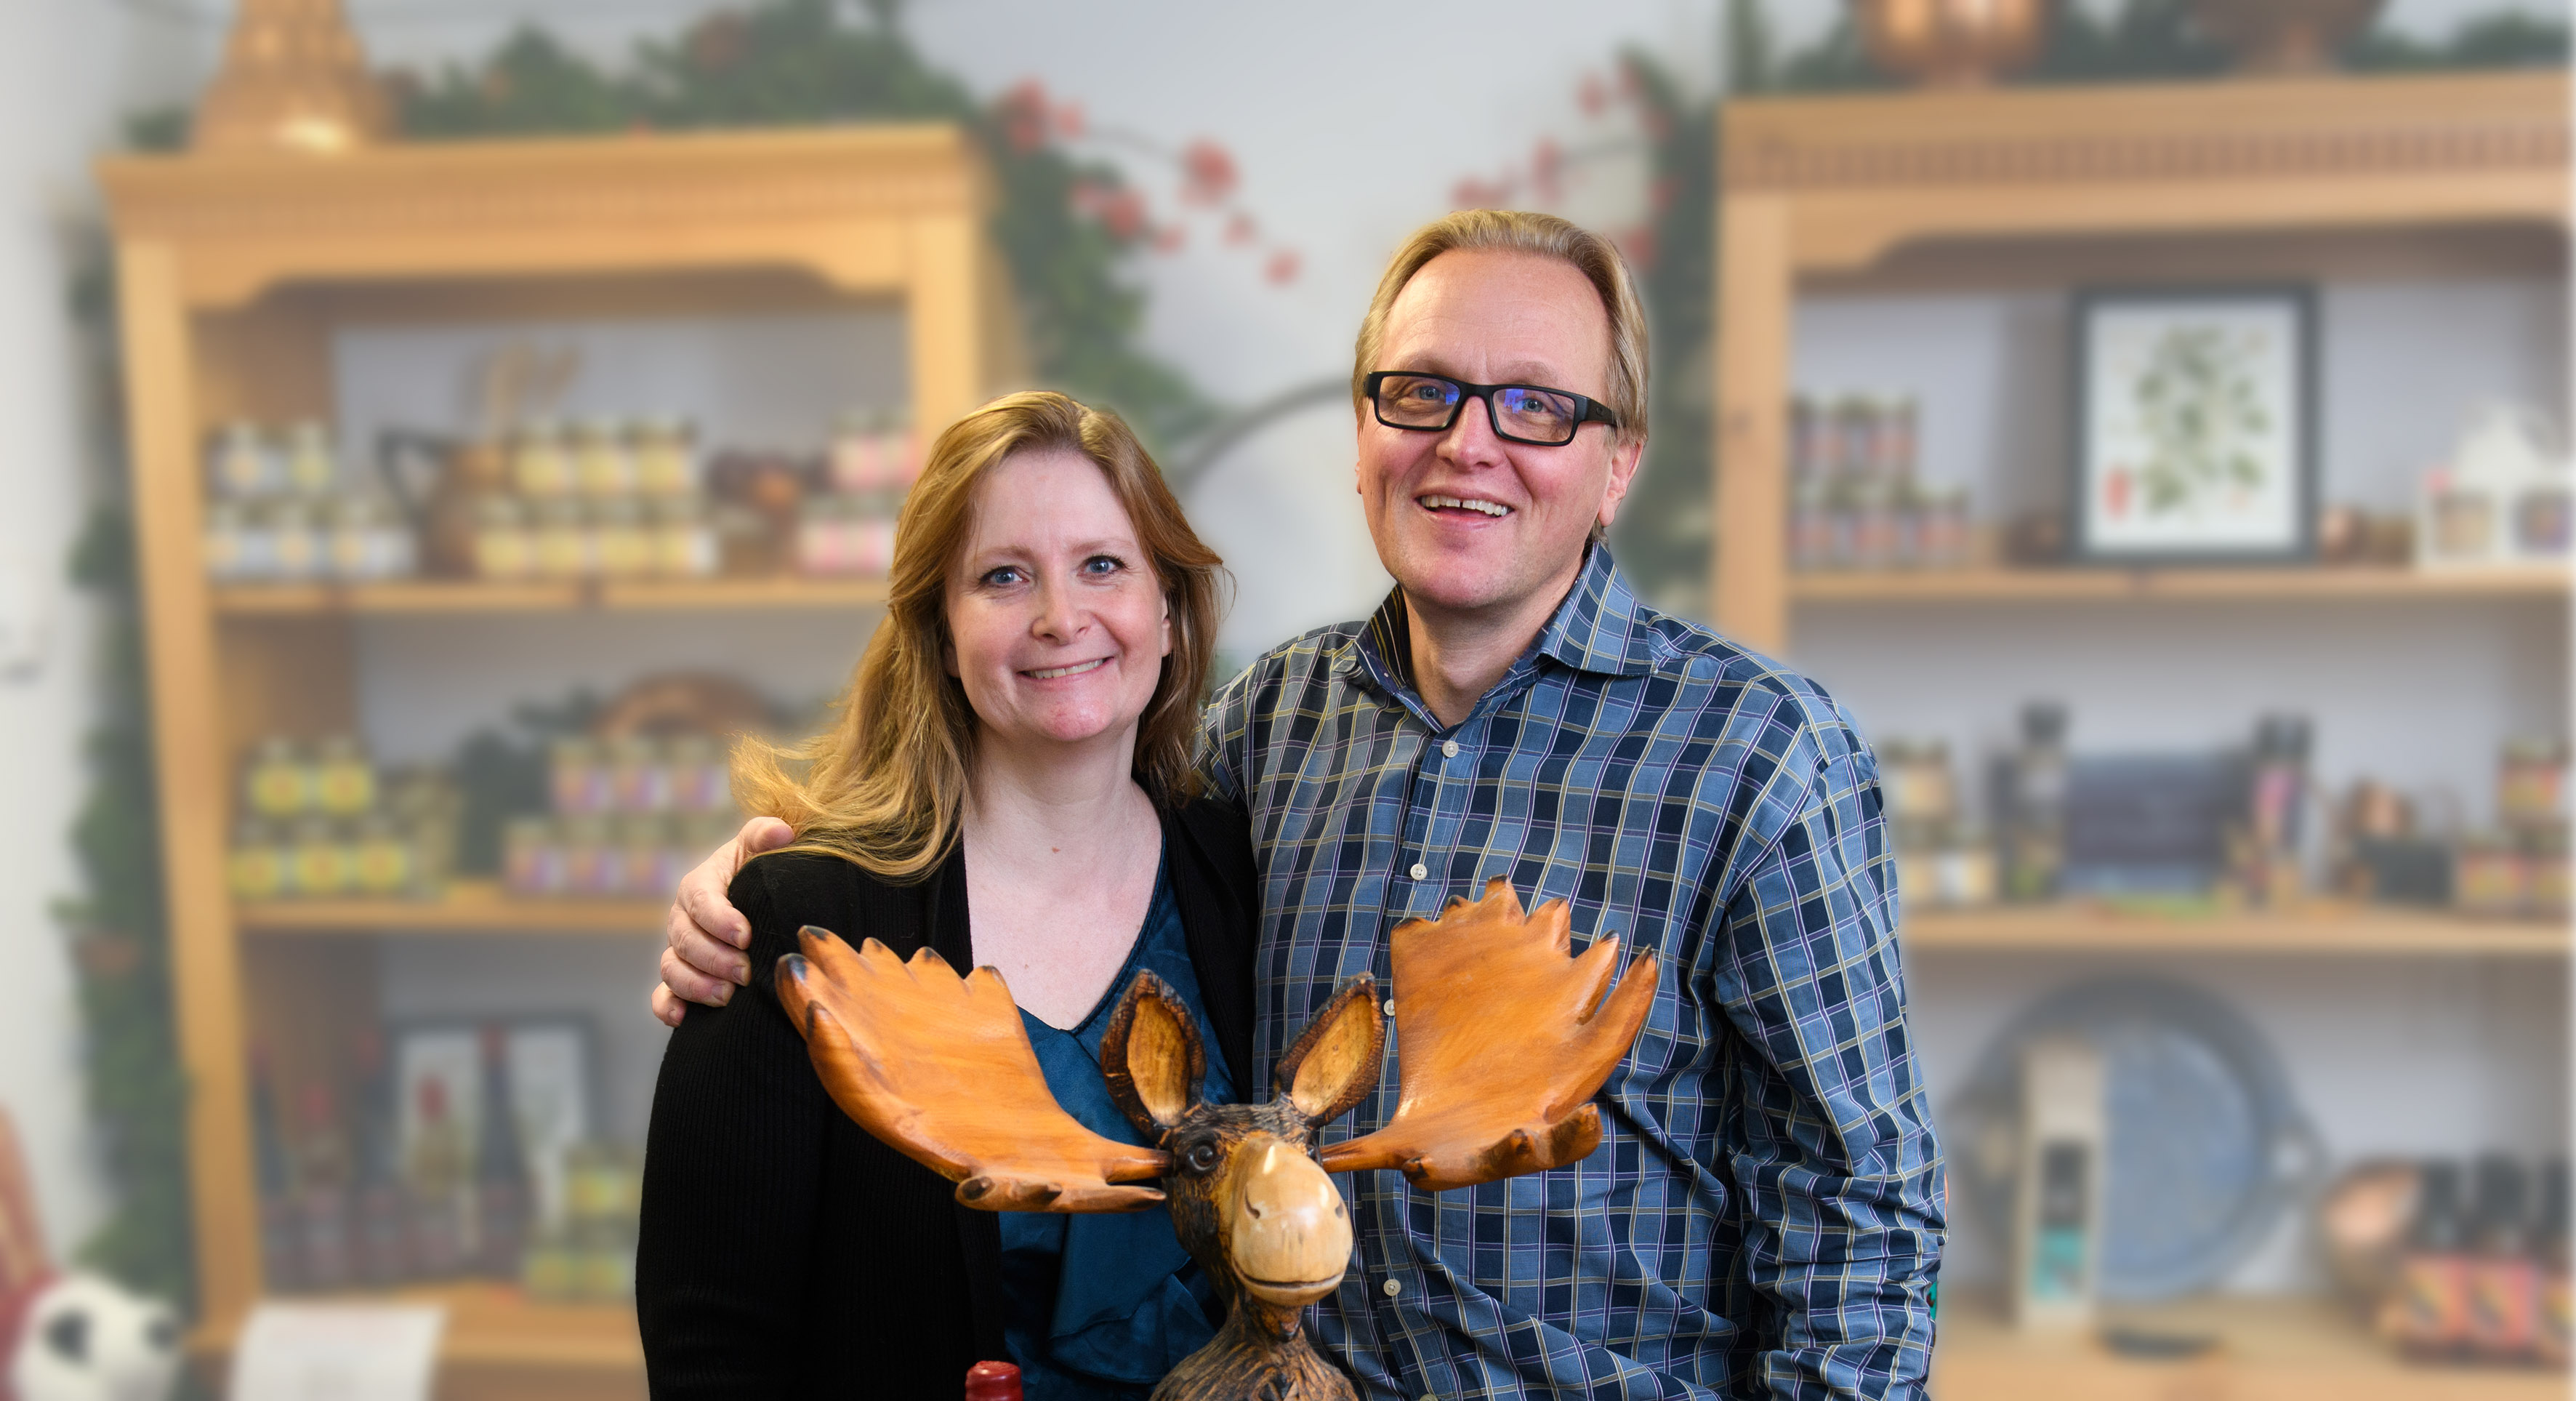 Making It: Got mustard? One gourmet food business brings local products to life.